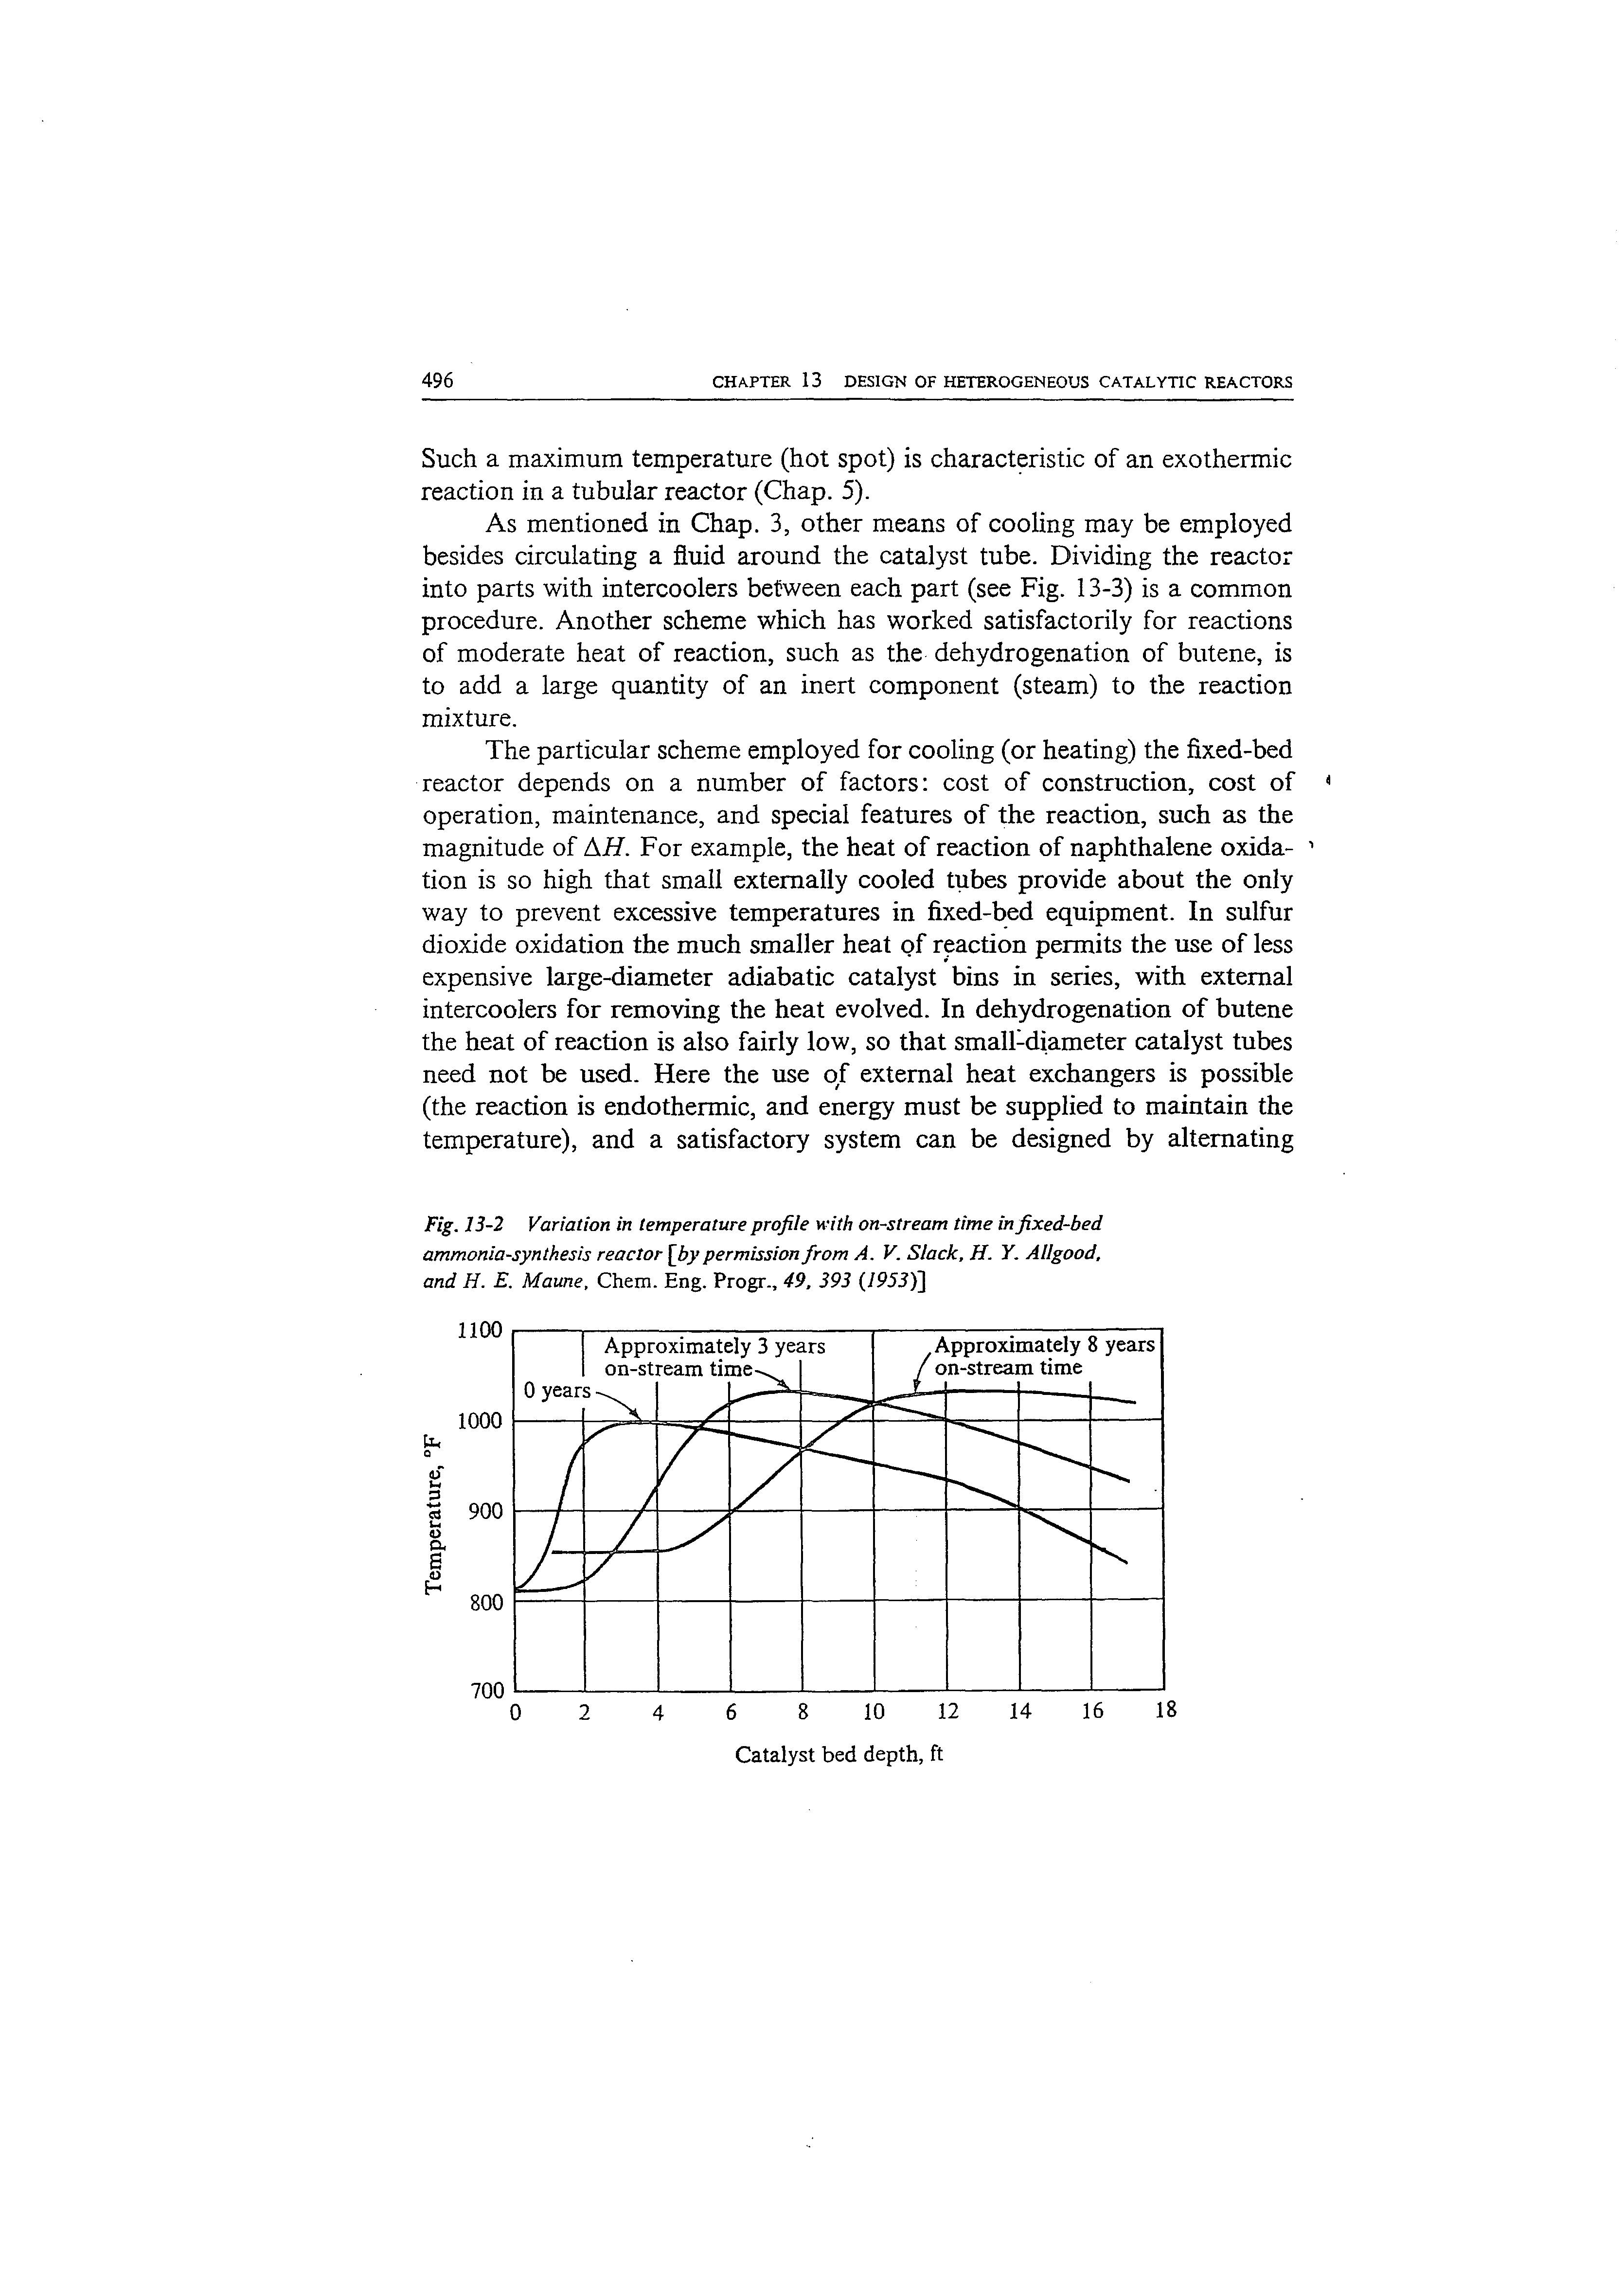 Fig. 13-2 Variation in temperature profile with on-stream time in fixed-bed ammonia-synthesis reactor [by permission from A. V. Slack. H. Y. Allgood, and H. E. Maune, Chem. Eng. Progr., 49. 393 (/95J)]...